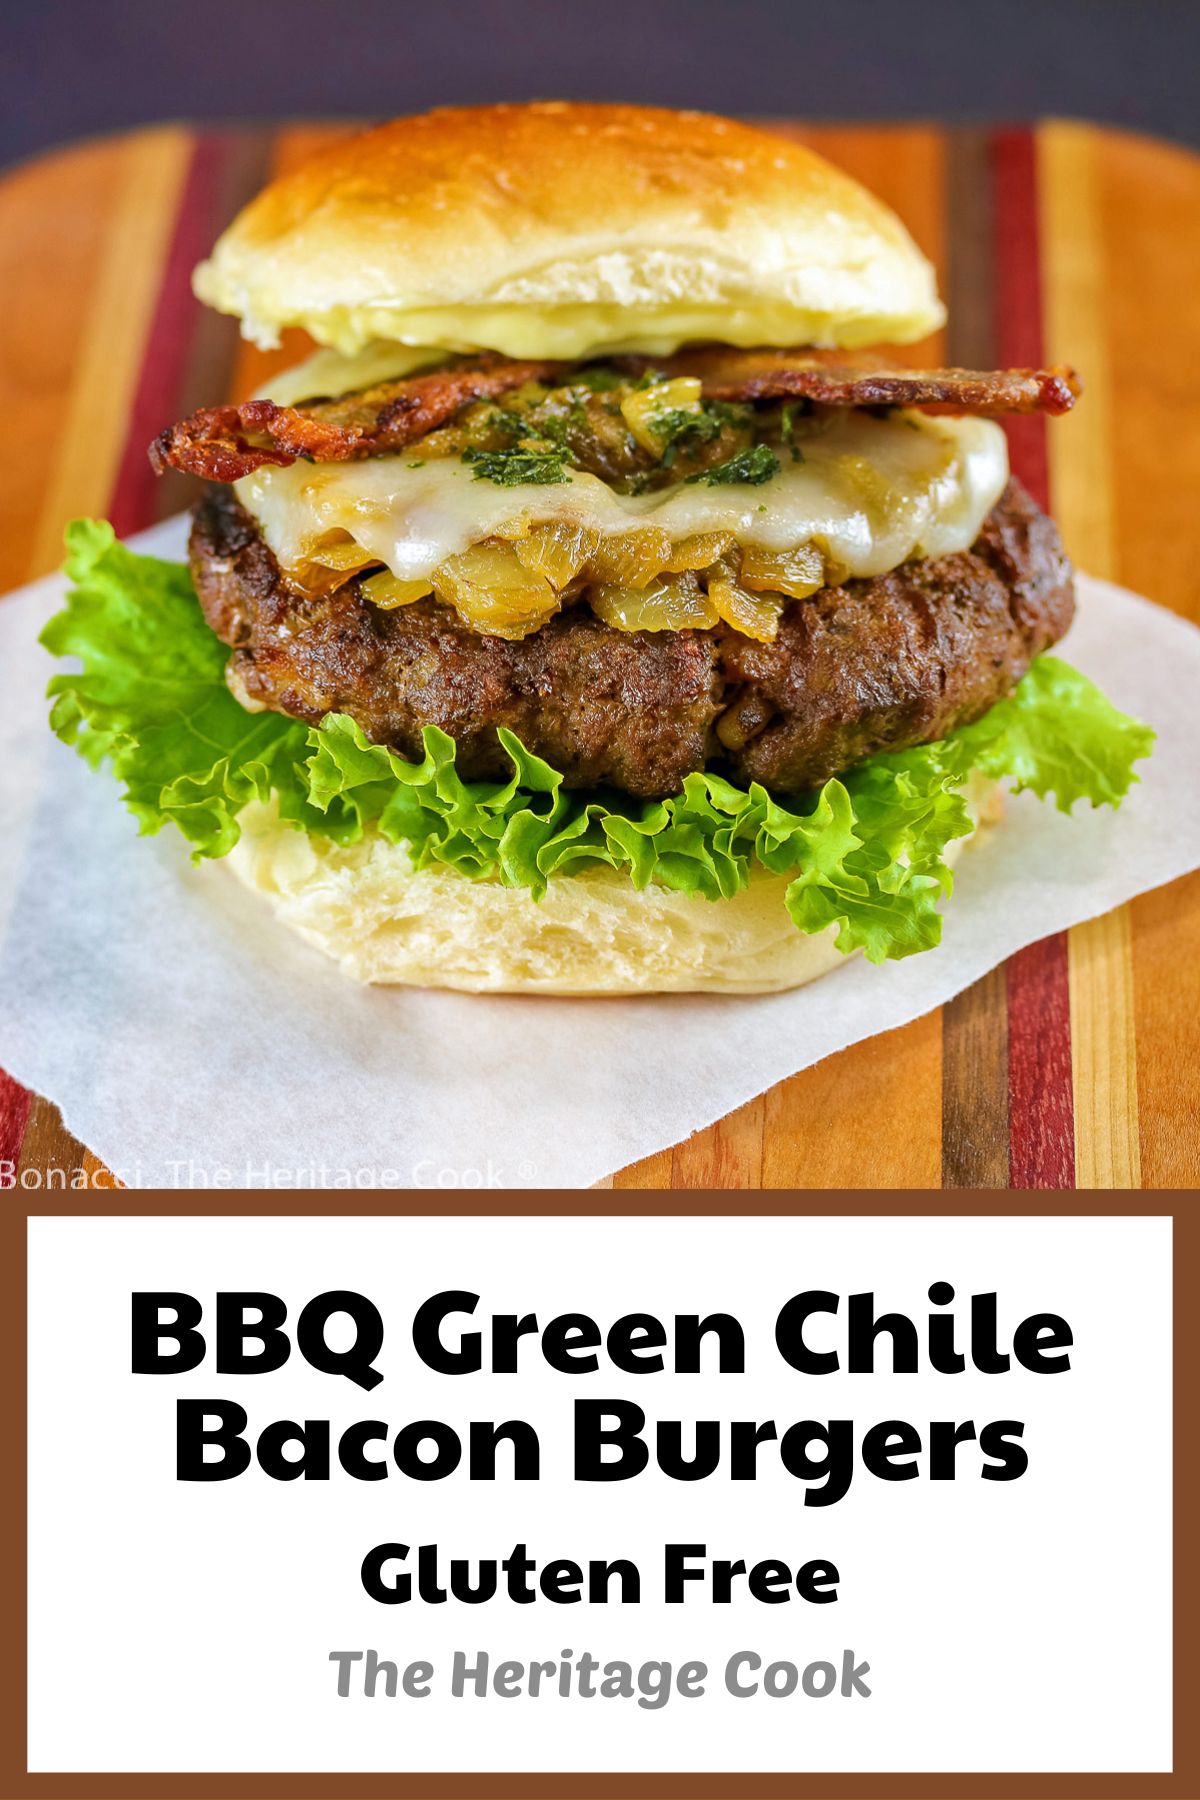 A grilled buffalo burger studded with chopped bacon fat and layered with lettuce, bacon, melted cheese, sauteed onions and Hatch green chiles; BBQ Green Chile Bacon Burgers © 2023 Jane Bonacci, The Heritage Cook. 